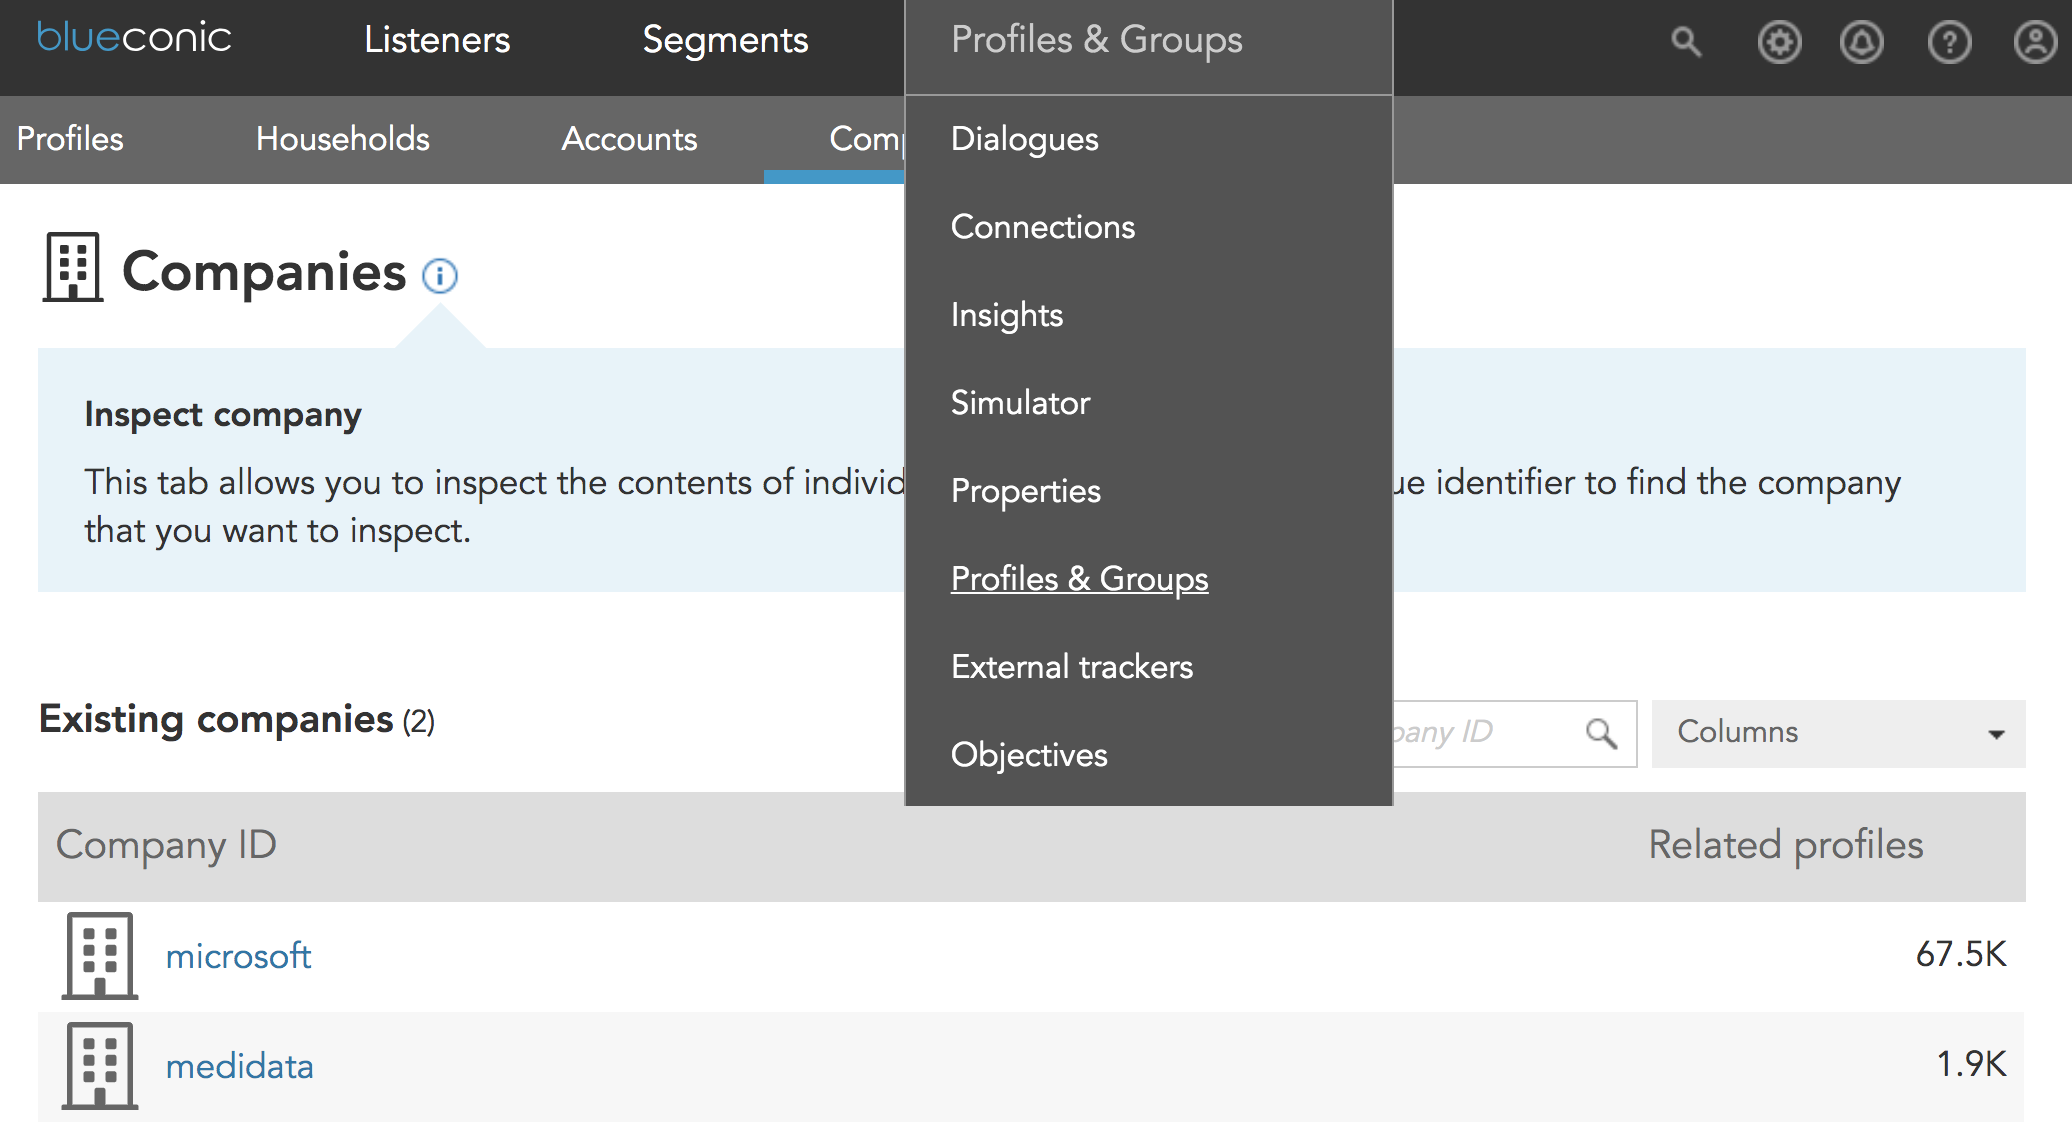 How do I manage group profiles in BlueConic?